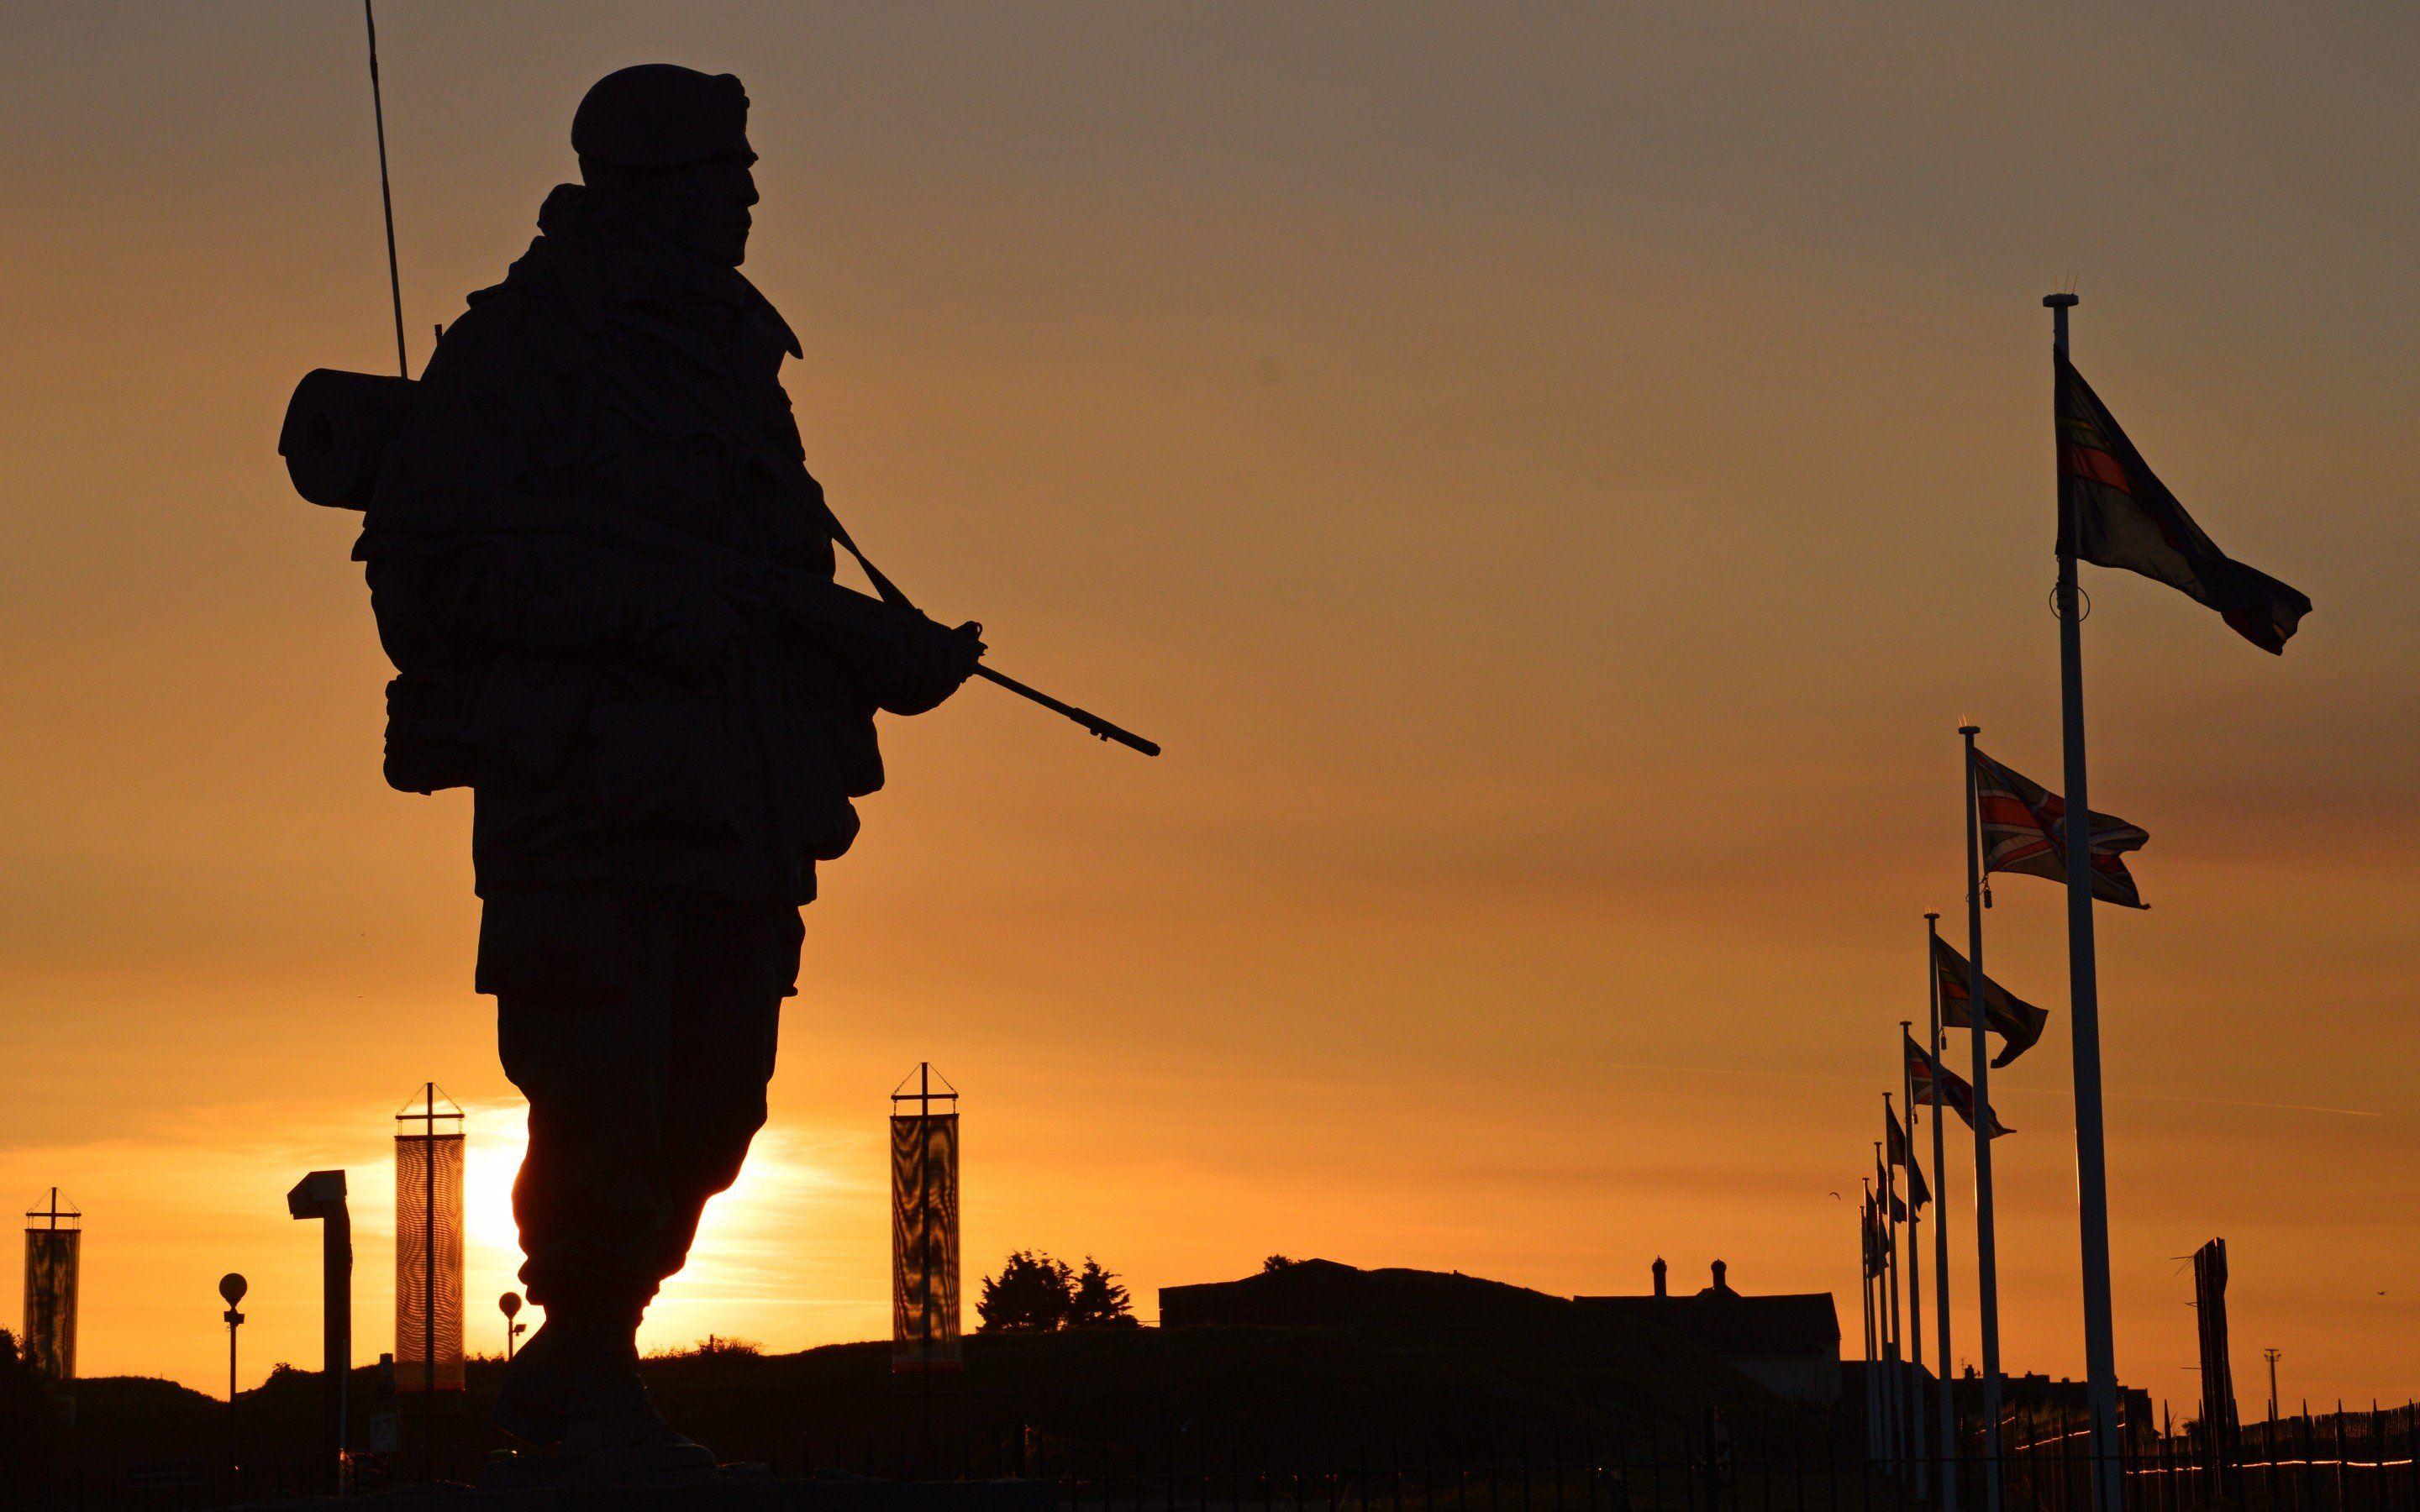 Soldiers Sunset Wallpapers Top Free Soldiers Sunset Backgrounds Wallpaperaccess 